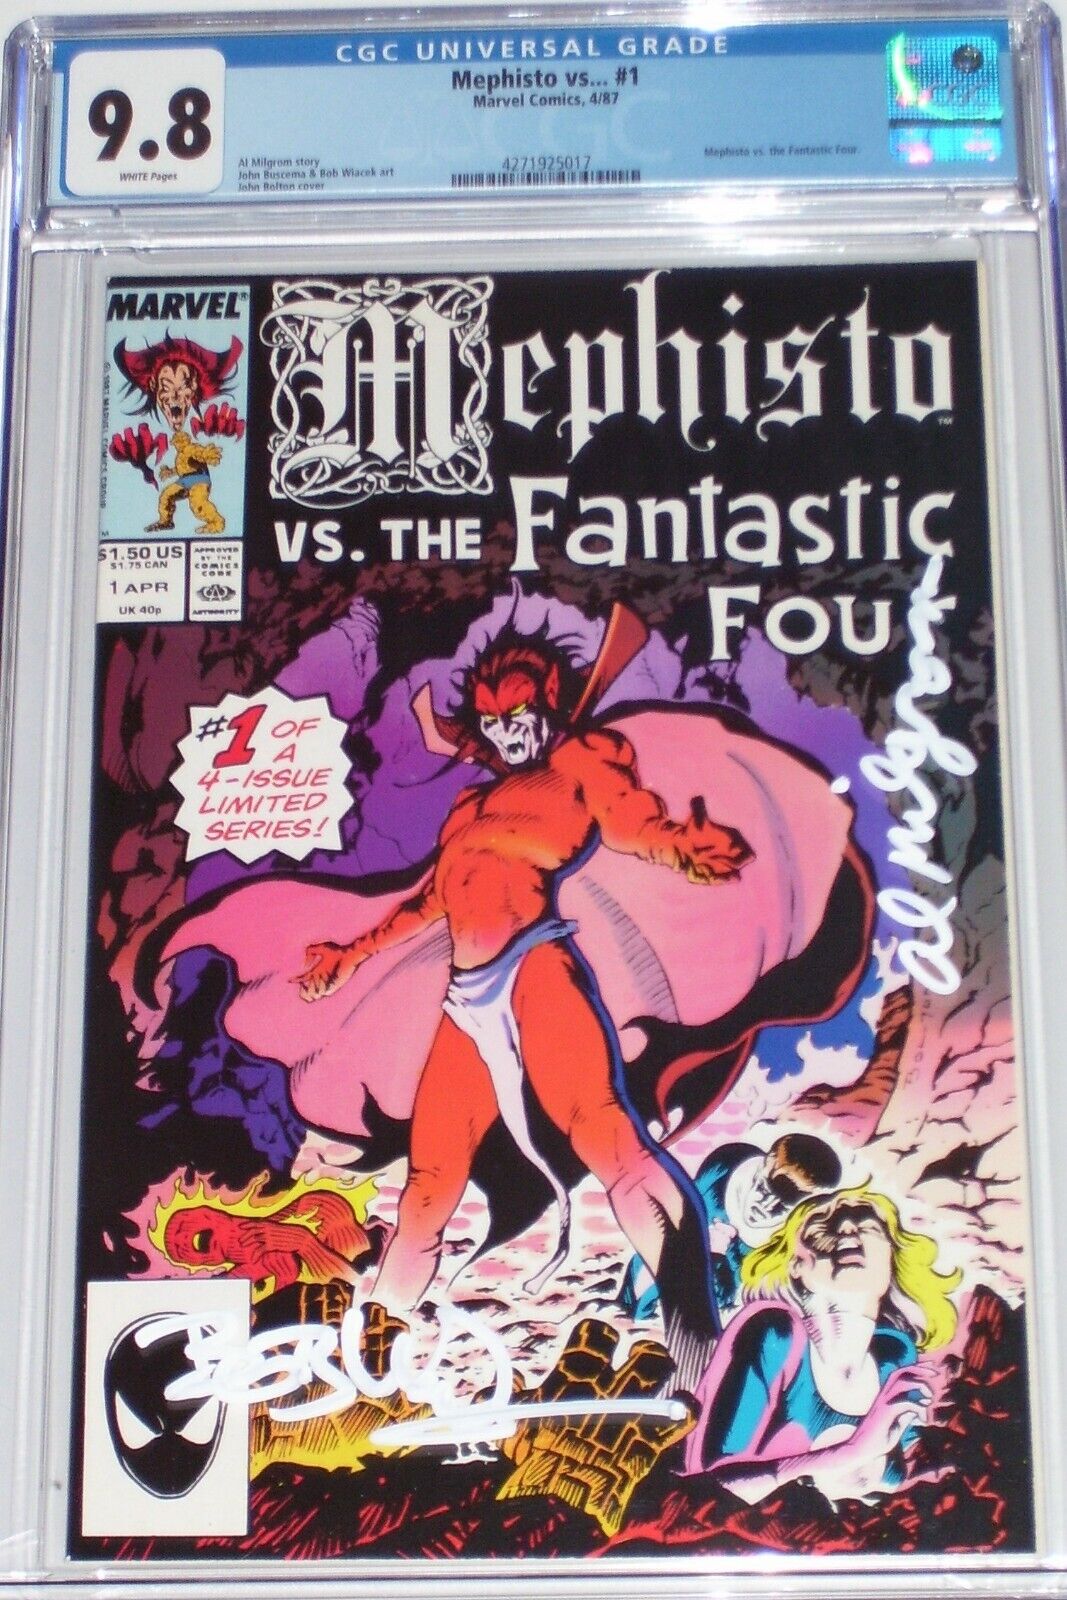 Mephisto vs The Fantastic Four #1 CGC 9.8 from April 1987 Case signed 2X